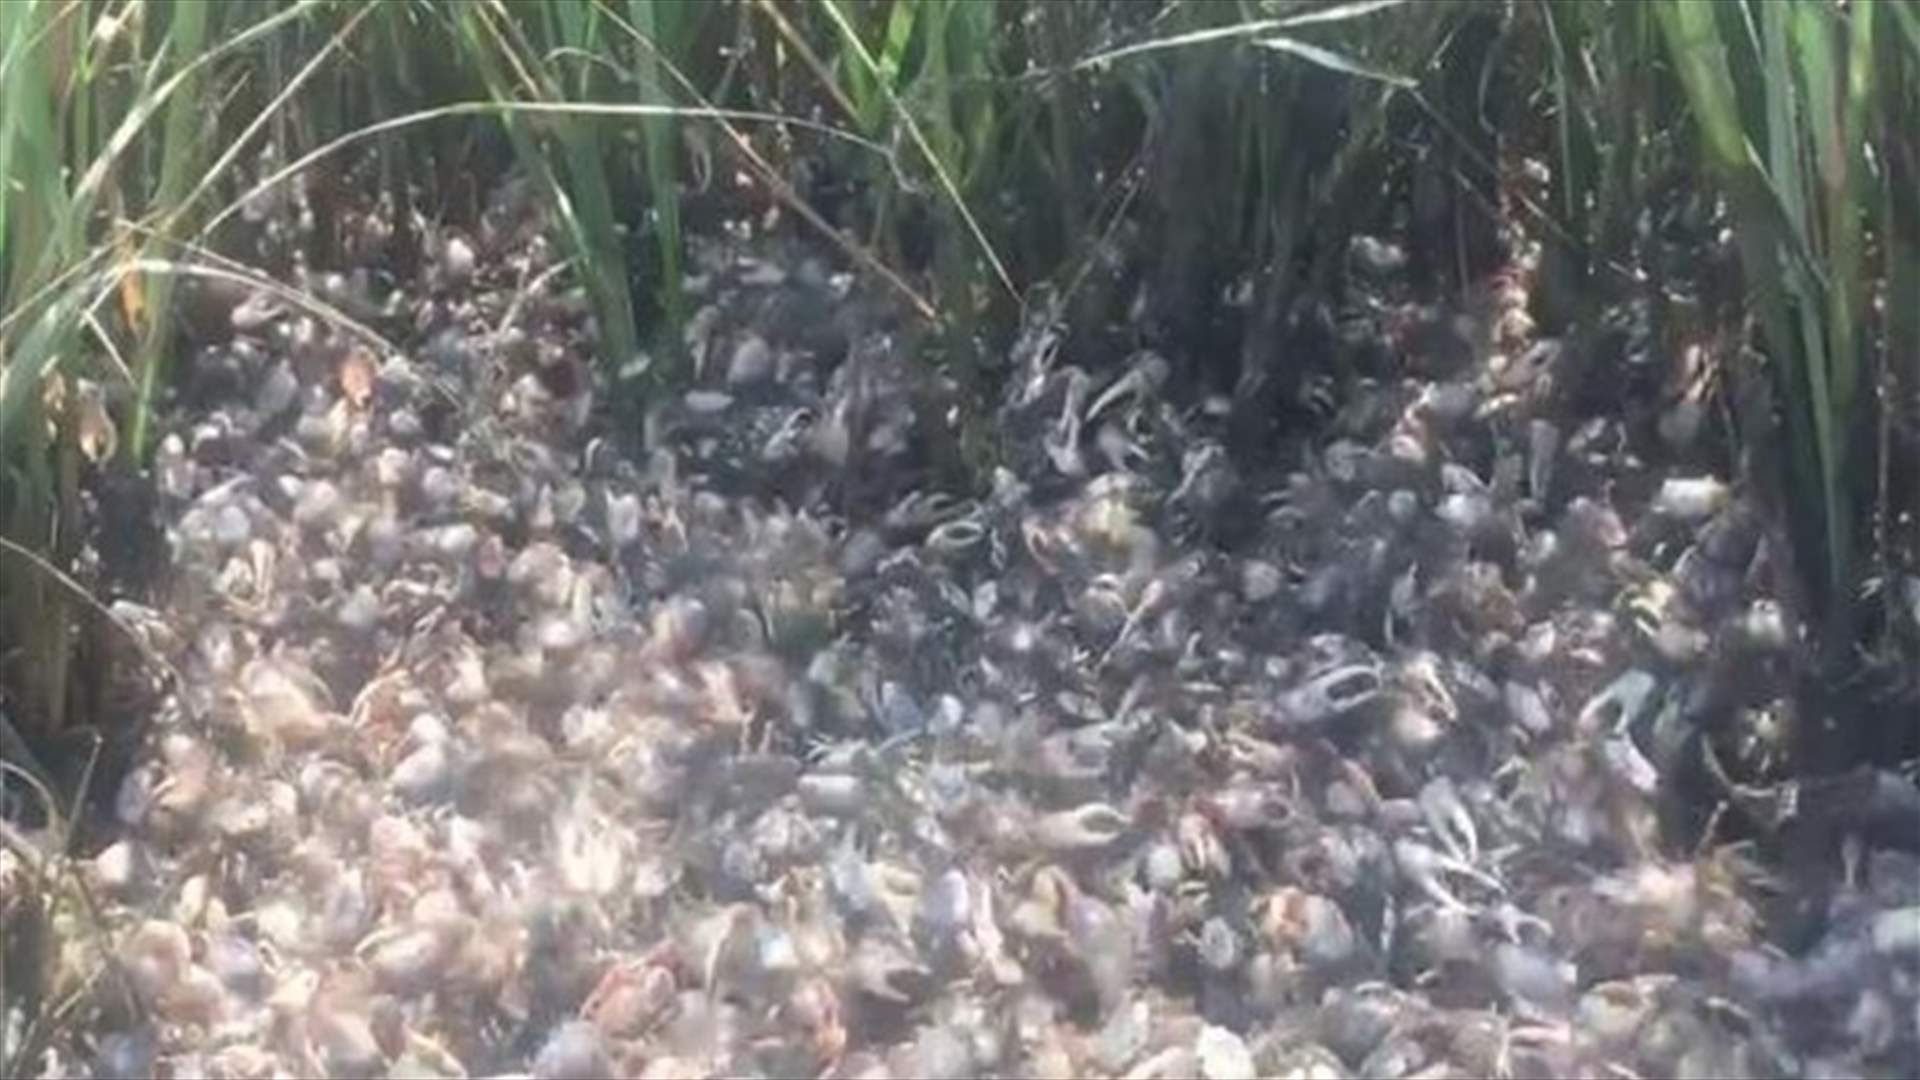 [VIDEO]  “Crab Army” Marches On A Beach